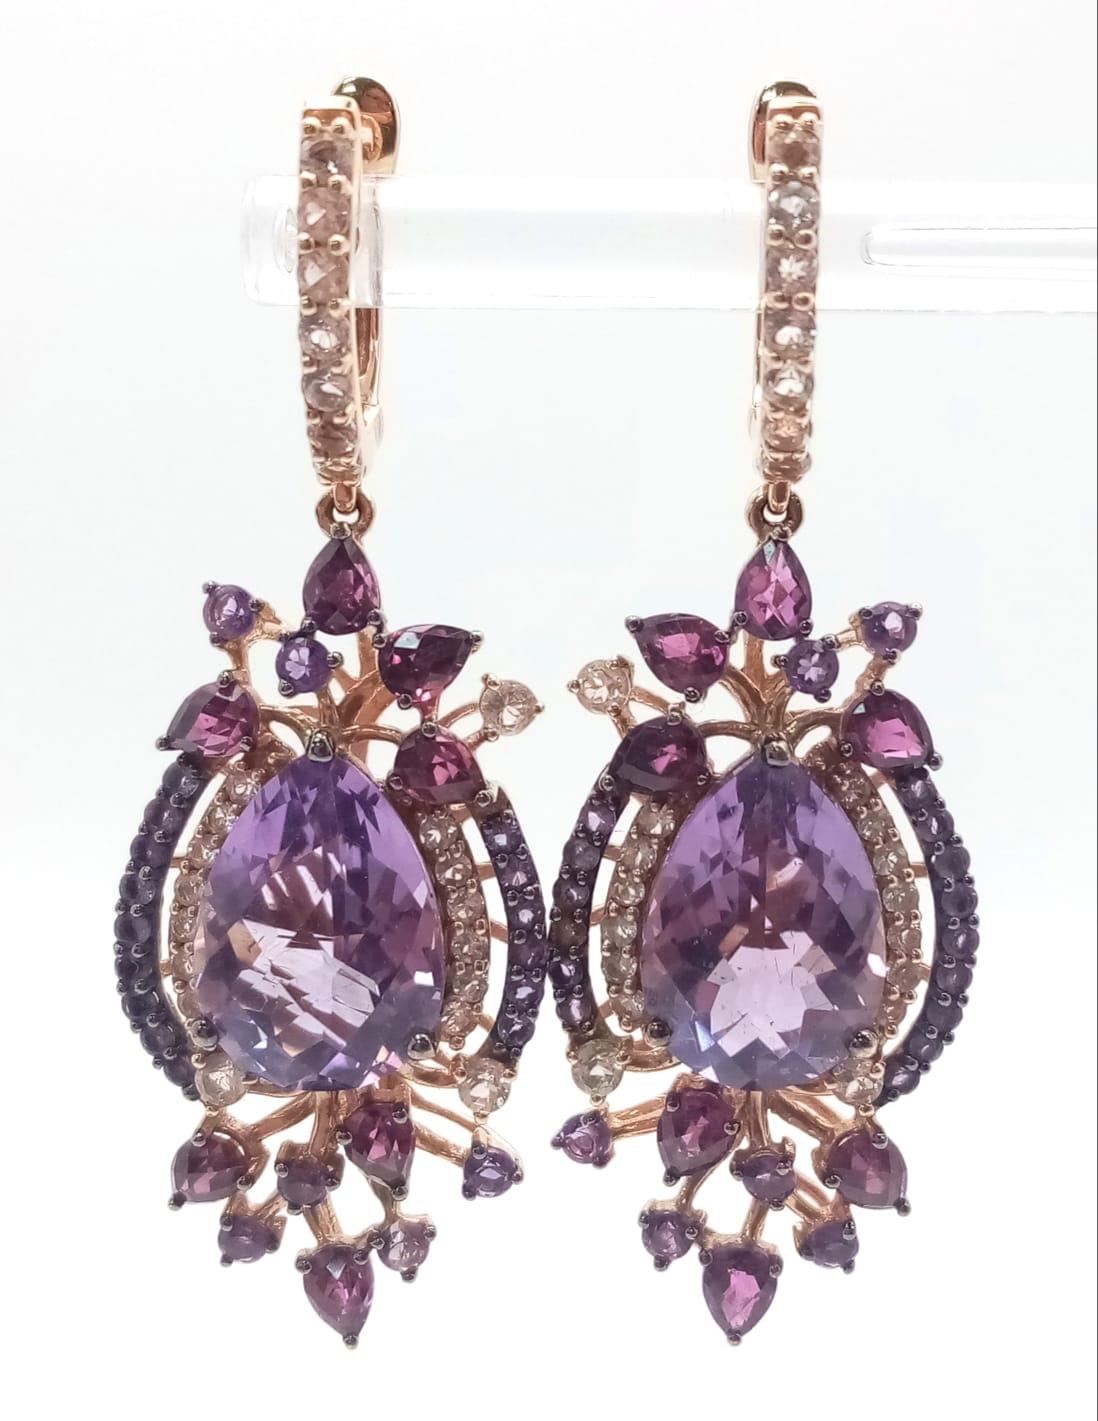 A stunning LE VIAN design, 14 K rose gold ring and earrings set with large pear shaped amethysts and - Image 3 of 11